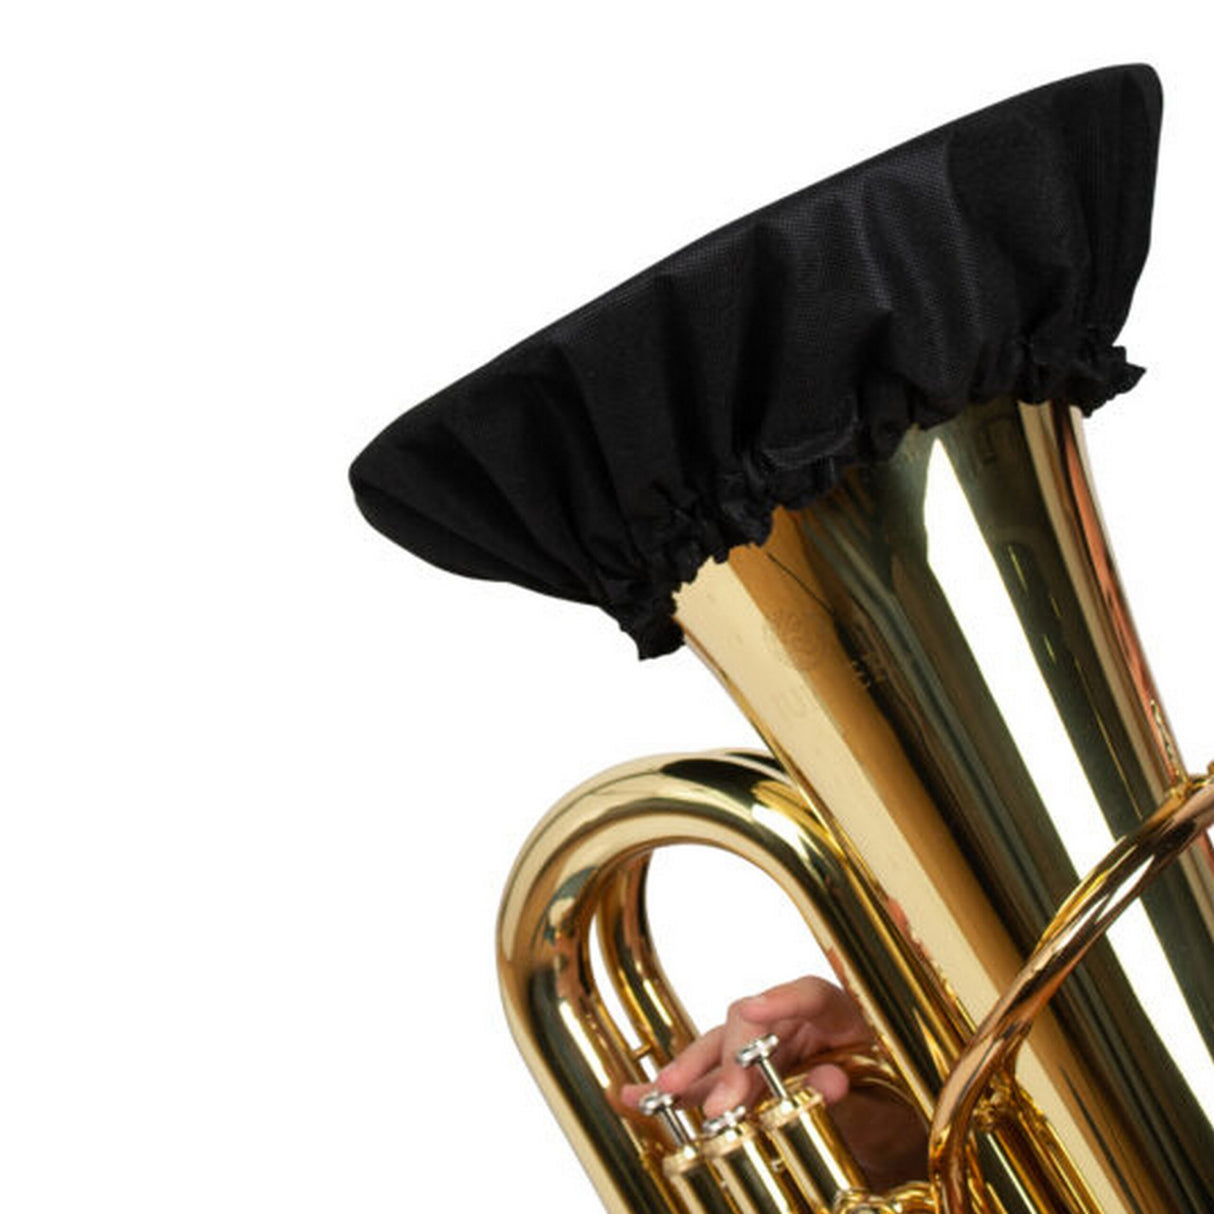 Gator GBELLCVR2223BK Wind Instrument Double-Layer Cover for Bell Sizes Ranging from 22 to 23-Inches, Black Color